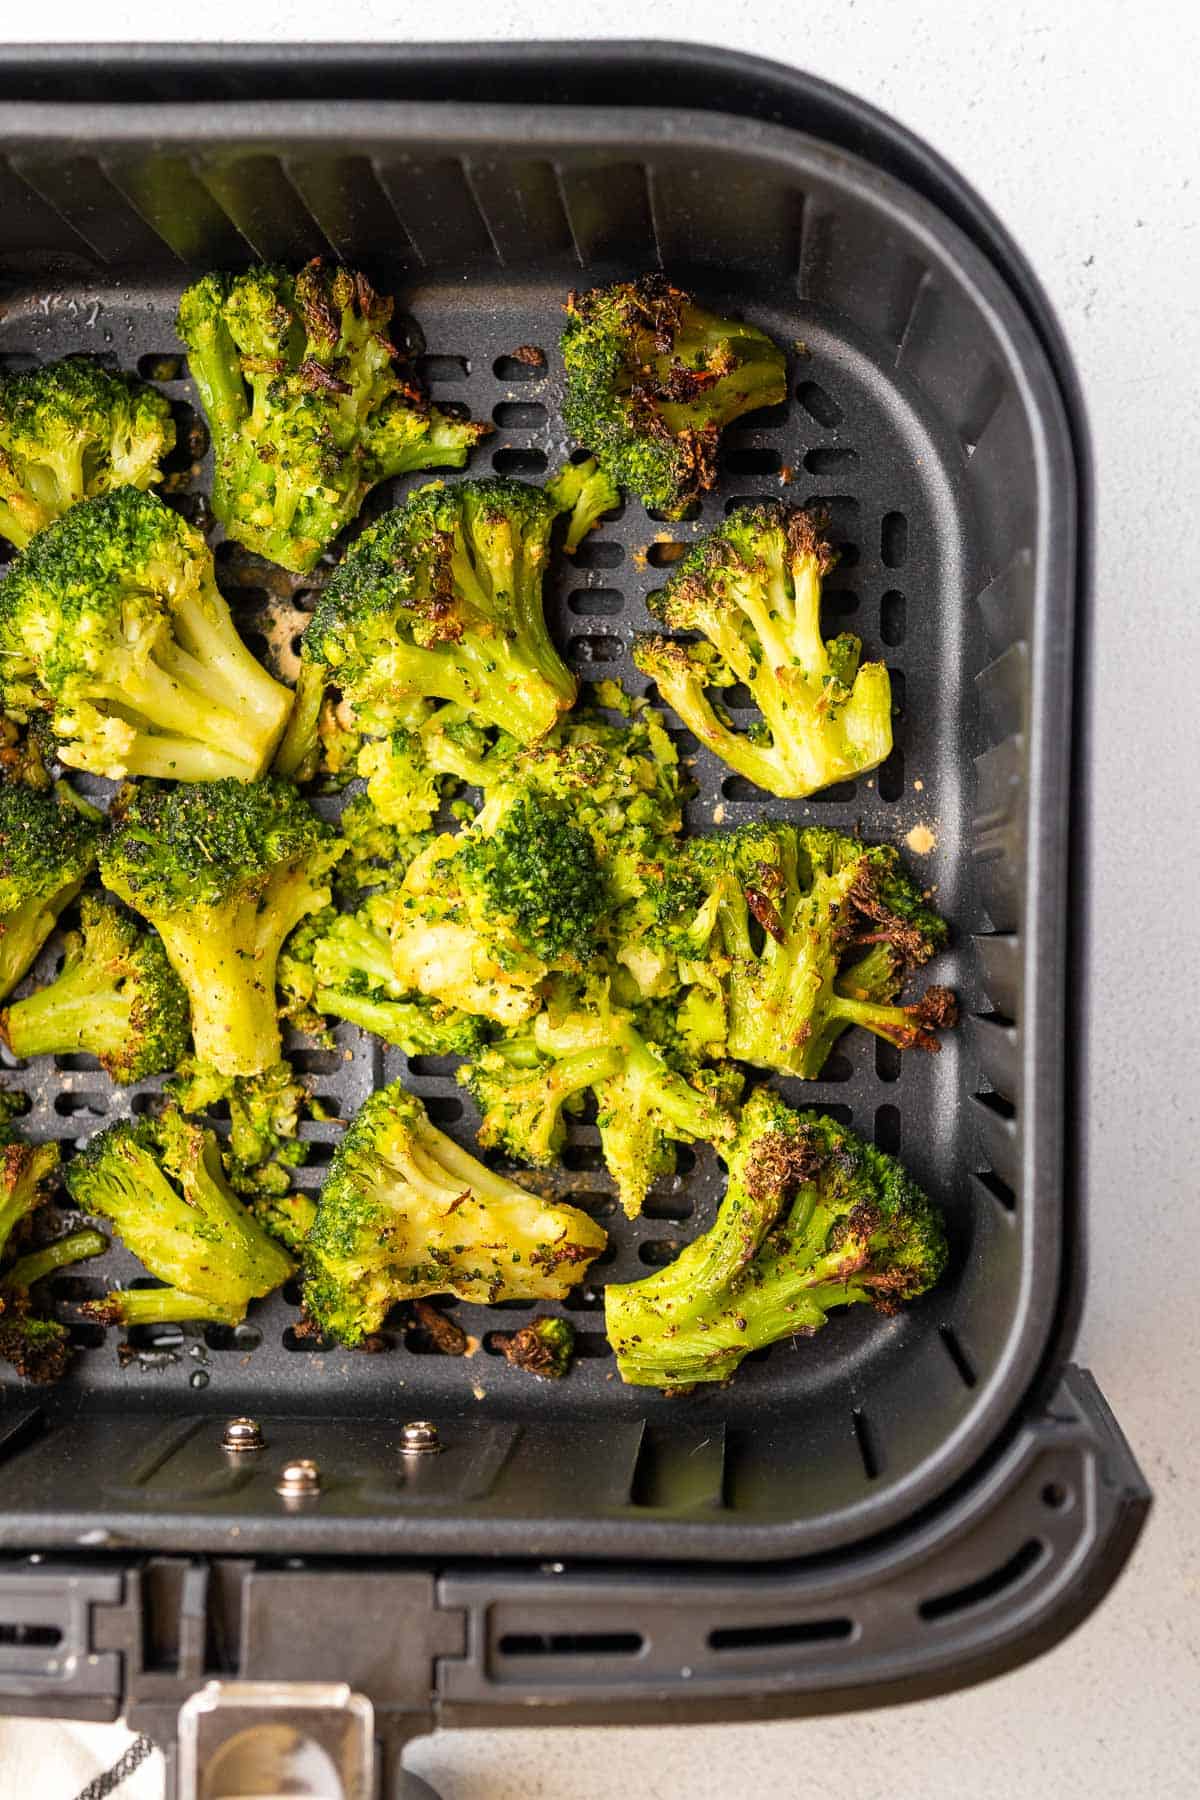 cooked broccoli in the air fryer basket before being served